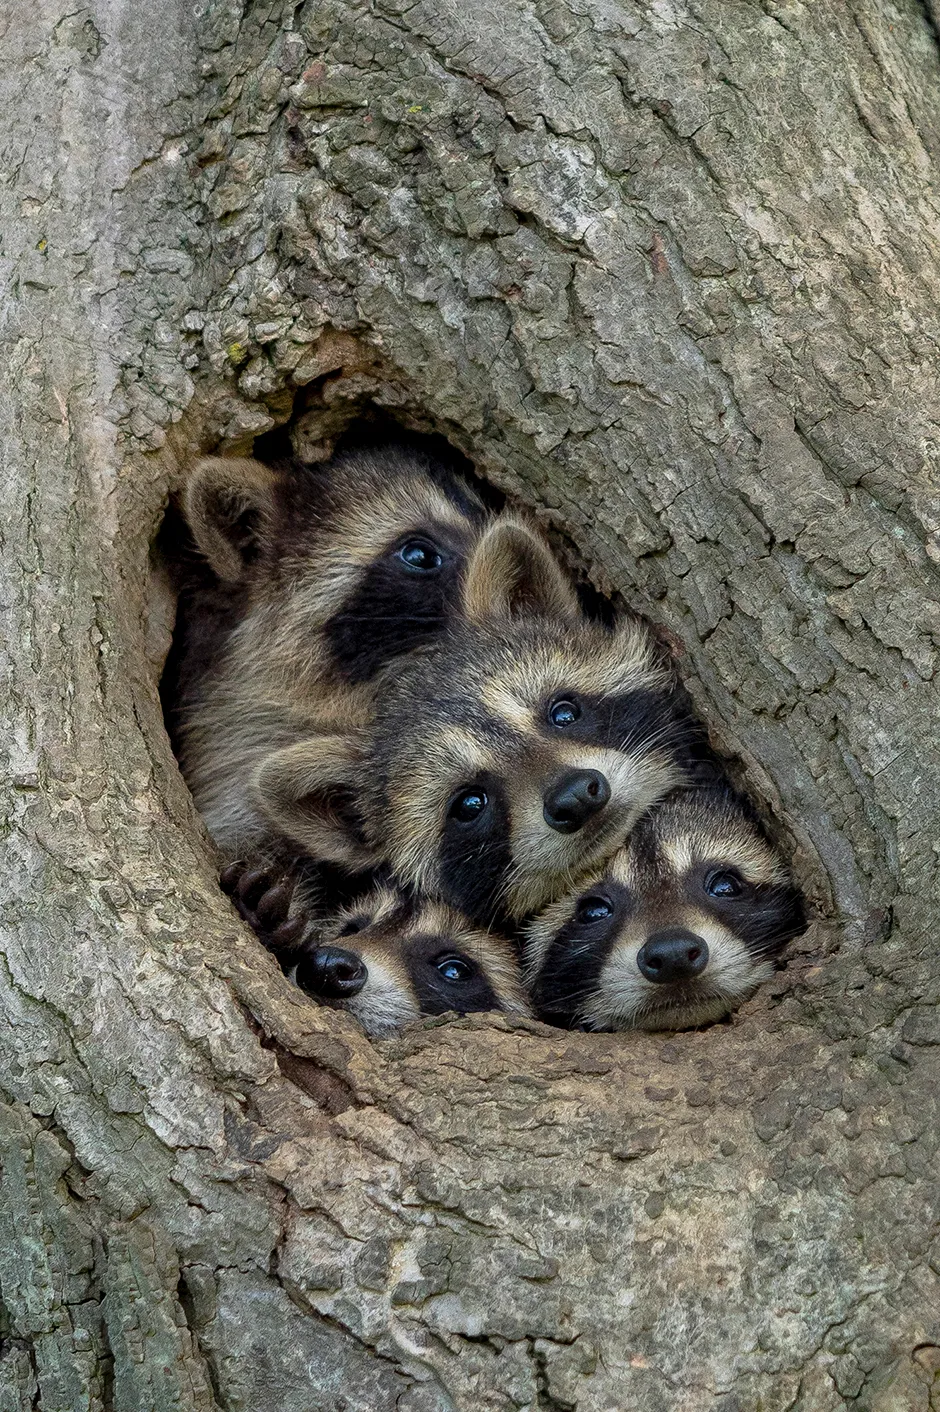 The Comedy Wildlife Photography Awards 2021 Kevin Biskaborn Barrie Canada Phone: Email: Title: Quarantine Life Description: Isolated inside with your family eager to get out and explore the world? These eastern raccoon kits are too. Just when you think there's no more room in the tree hollow, mother raccoon appears and displays just how compact the space is. The babies clambered all over their mom and each another, struggling to take a look at the exact same time. This photo was taken in Southwestern Ontario, Canada. After exploring a particular area with numerous tree hallows, I identified it as a hot spot for raccoon families. Since raccoons will move from den to den, often not spending more than one night at a time in a particular den, locating an area with numerous options is key to locating the animals. I stumbled across this family and immediately worked on leveling the camera with the hole to prevent an upward angle. When the camera and tripod were ready, the baby raccoons were extremely curious (and cooperative), sticking their heads out for a closer look! Animal: Raccoon / Procyon lotor Location of shot: Southwestern Ontario, Canada